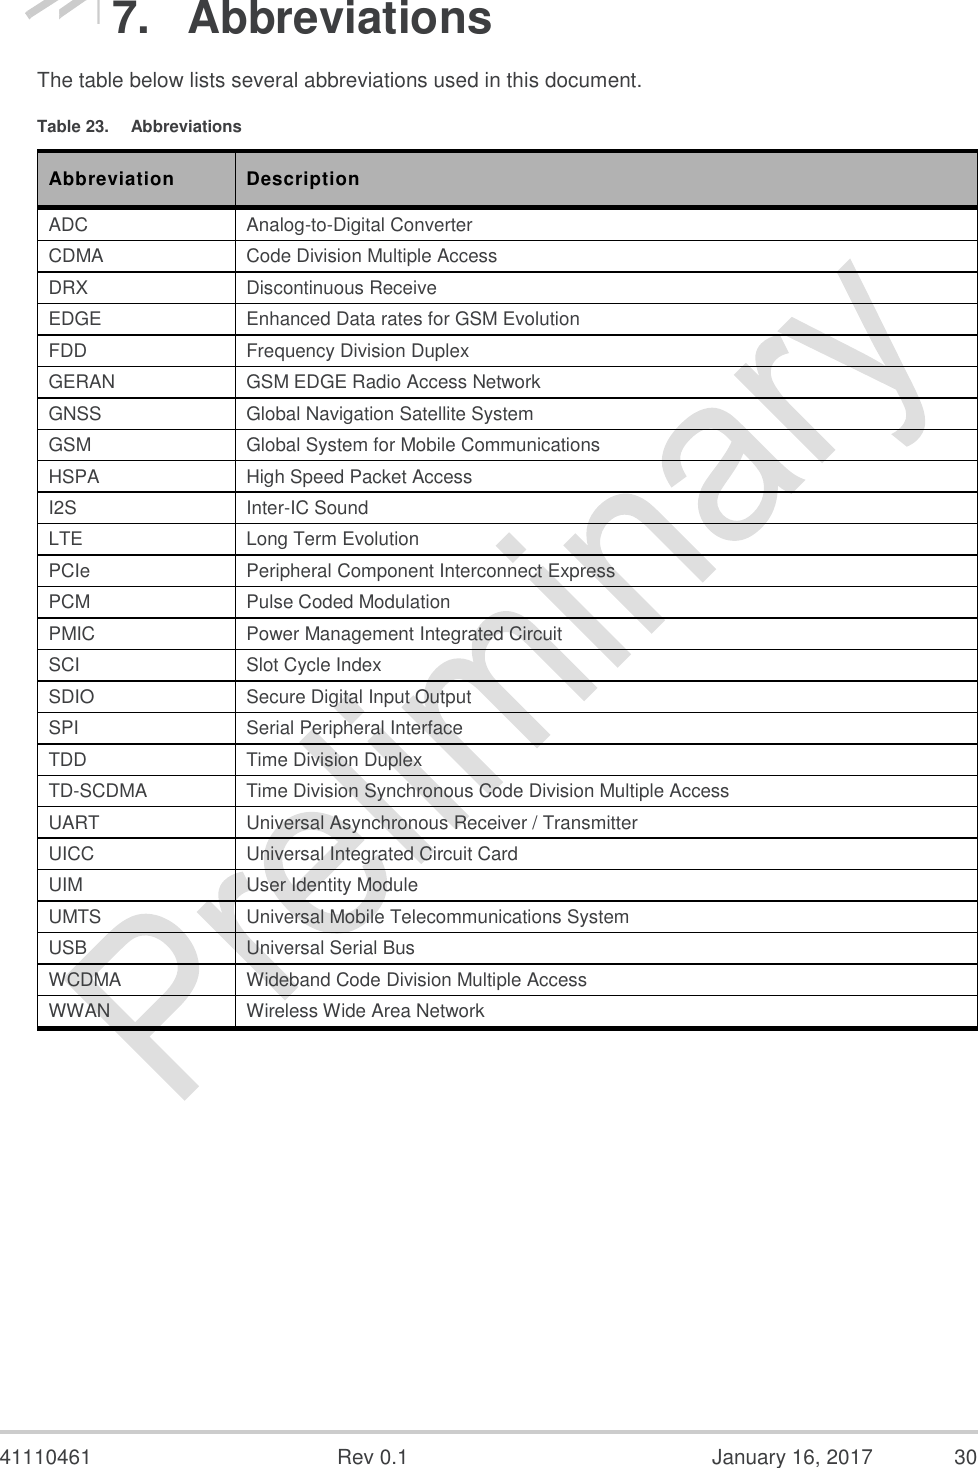  41110461  Rev 0.1  January 16, 2017  30 7.  Abbreviations The table below lists several abbreviations used in this document. Table 23.  Abbreviations Abbreviation Description ADC Analog-to-Digital Converter CDMA Code Division Multiple Access DRX Discontinuous Receive EDGE Enhanced Data rates for GSM Evolution FDD Frequency Division Duplex GERAN GSM EDGE Radio Access Network GNSS Global Navigation Satellite System GSM Global System for Mobile Communications HSPA High Speed Packet Access I2S Inter-IC Sound LTE Long Term Evolution PCIe Peripheral Component Interconnect Express PCM Pulse Coded Modulation PMIC Power Management Integrated Circuit SCI Slot Cycle Index SDIO Secure Digital Input Output SPI Serial Peripheral Interface TDD Time Division Duplex TD-SCDMA Time Division Synchronous Code Division Multiple Access UART Universal Asynchronous Receiver / Transmitter UICC Universal Integrated Circuit Card UIM User Identity Module UMTS Universal Mobile Telecommunications System USB Universal Serial Bus WCDMA Wideband Code Division Multiple Access WWAN Wireless Wide Area Network  